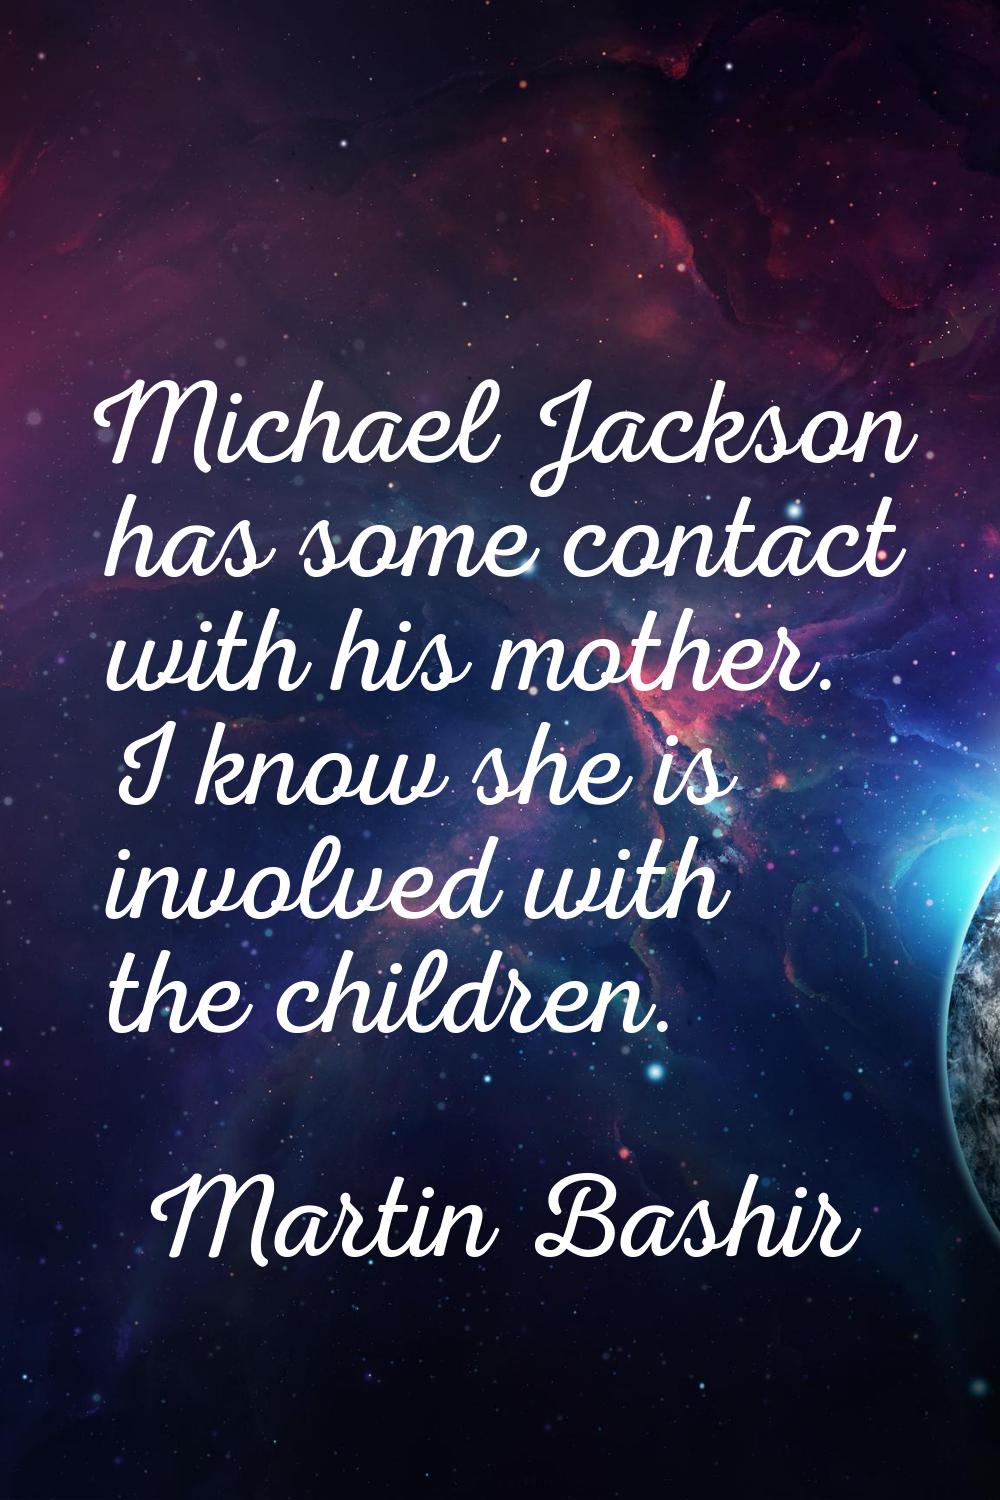 Michael Jackson has some contact with his mother. I know she is involved with the children.